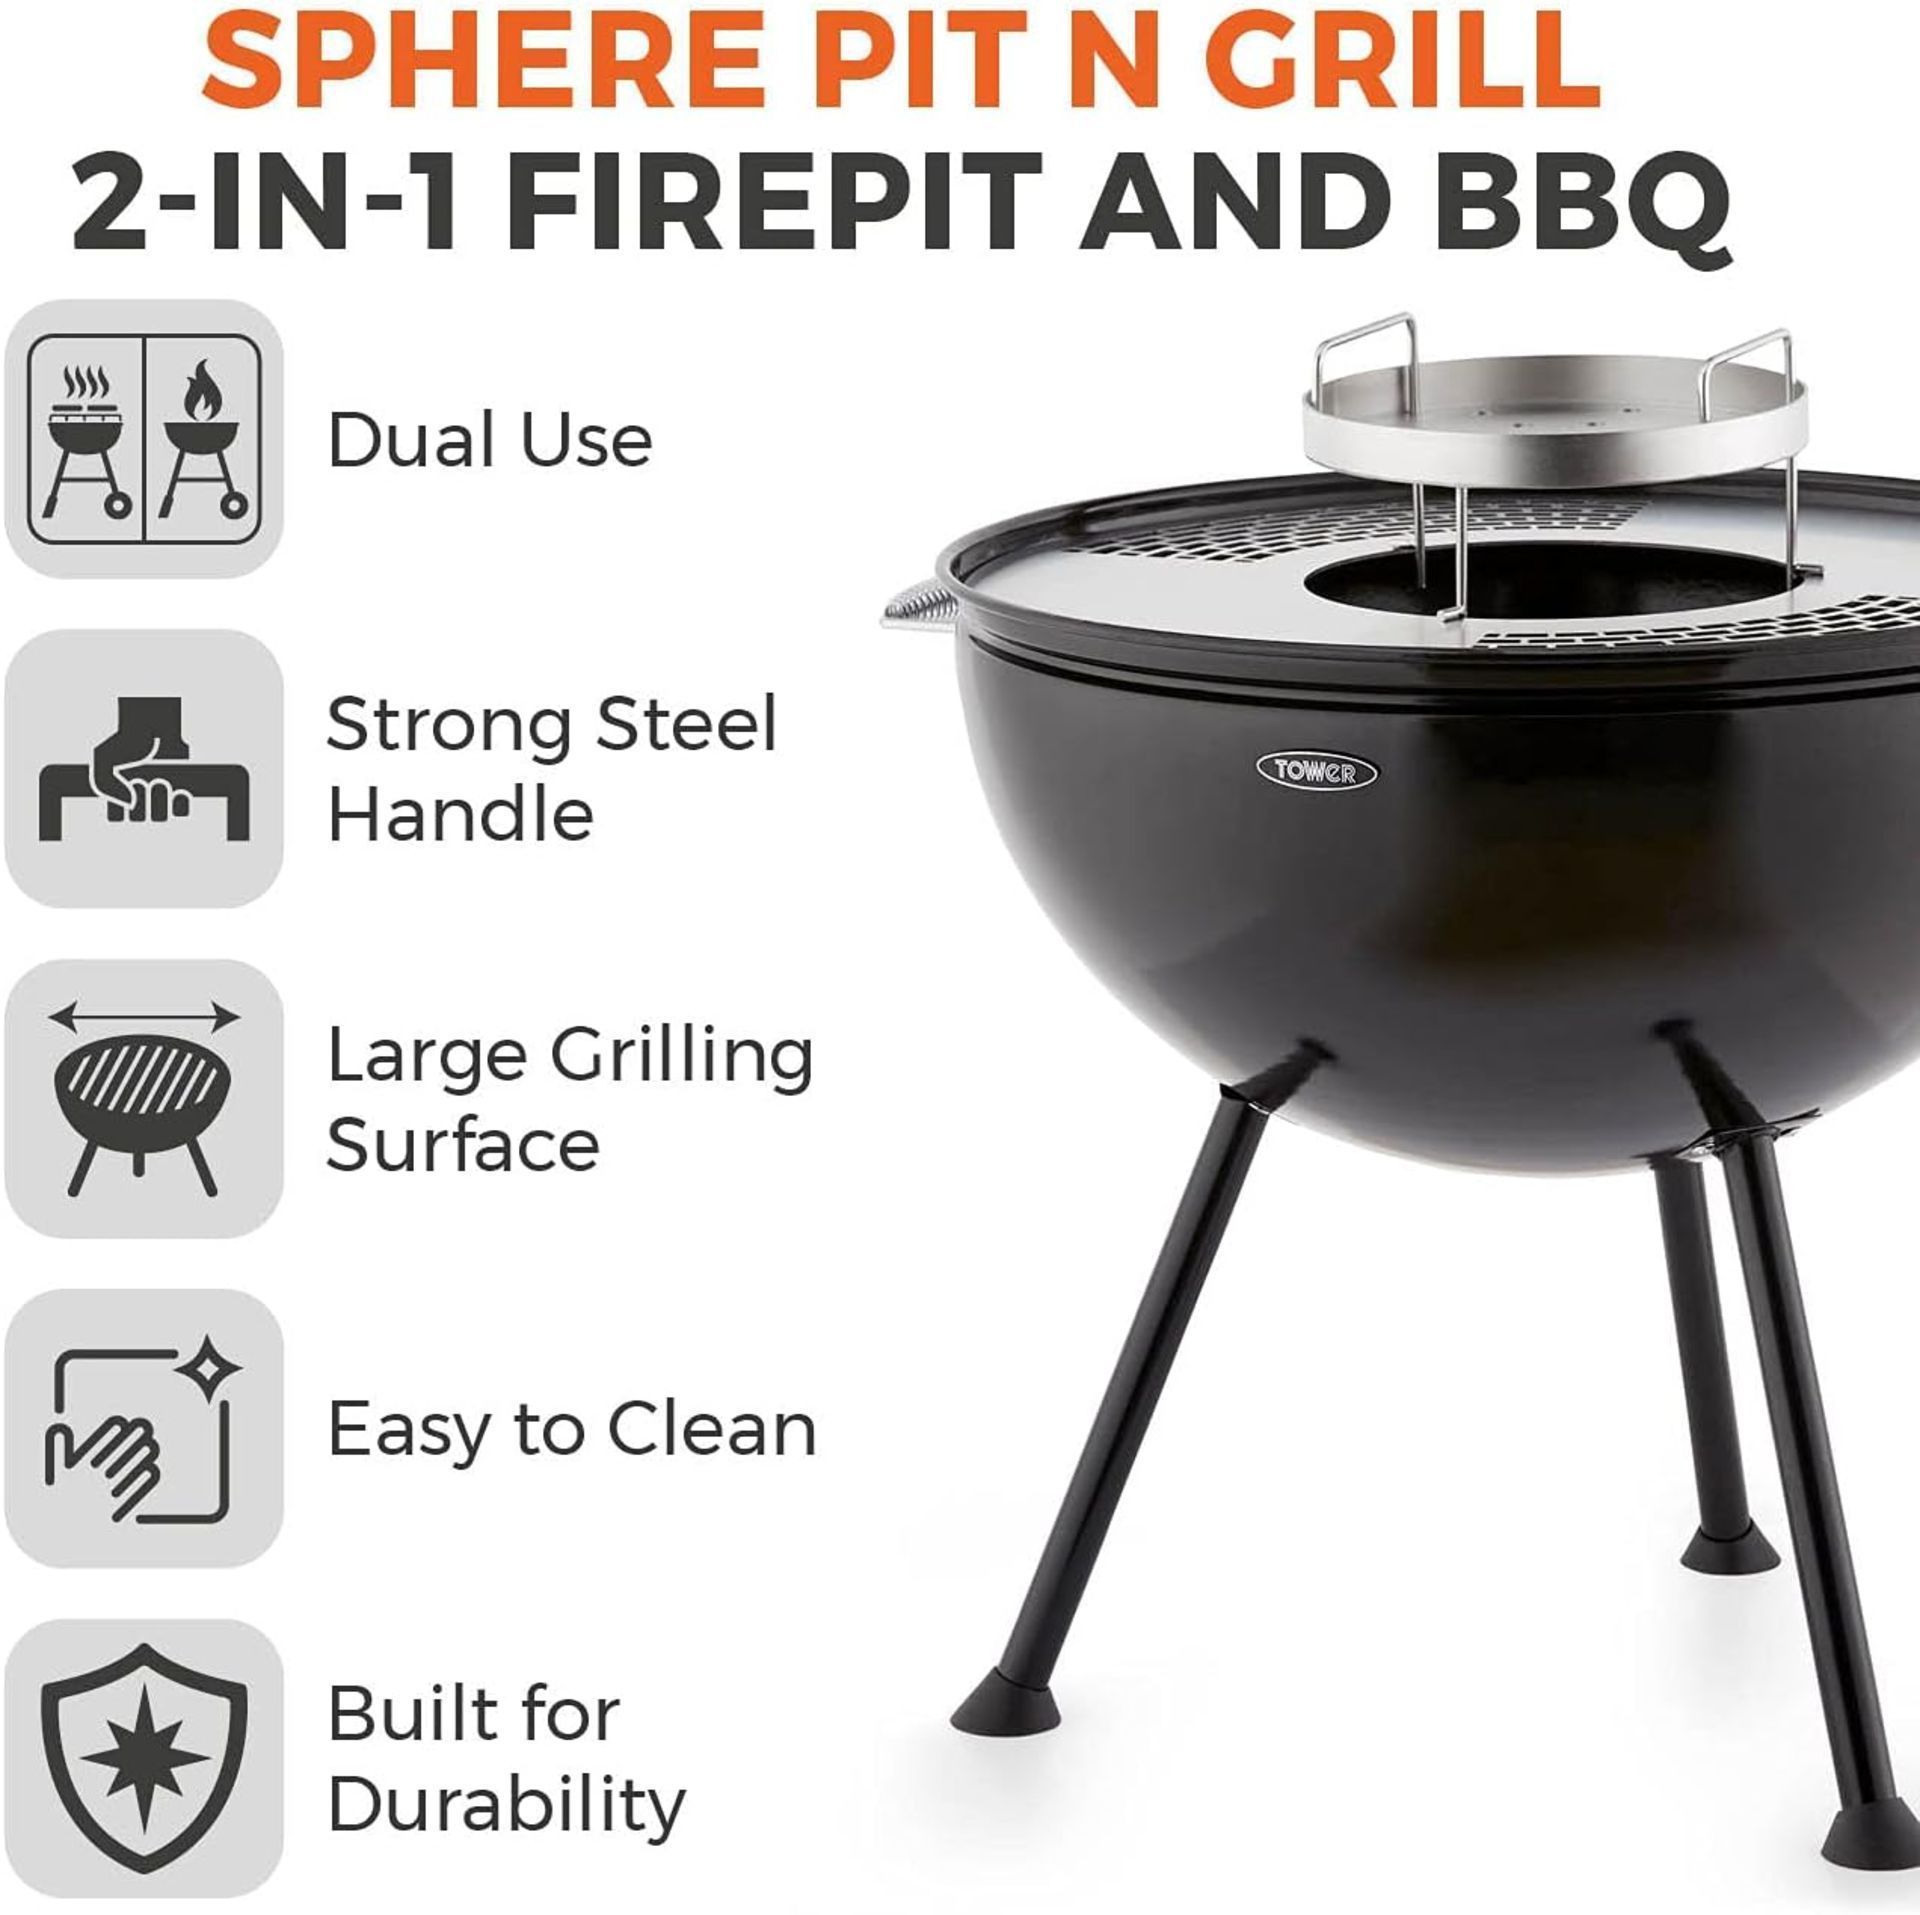 New & Boxed Tower Sphere Fire Pit and BBQ Grill, Black. (VQ577). DUAL USE â€“ This multi- - Image 3 of 6